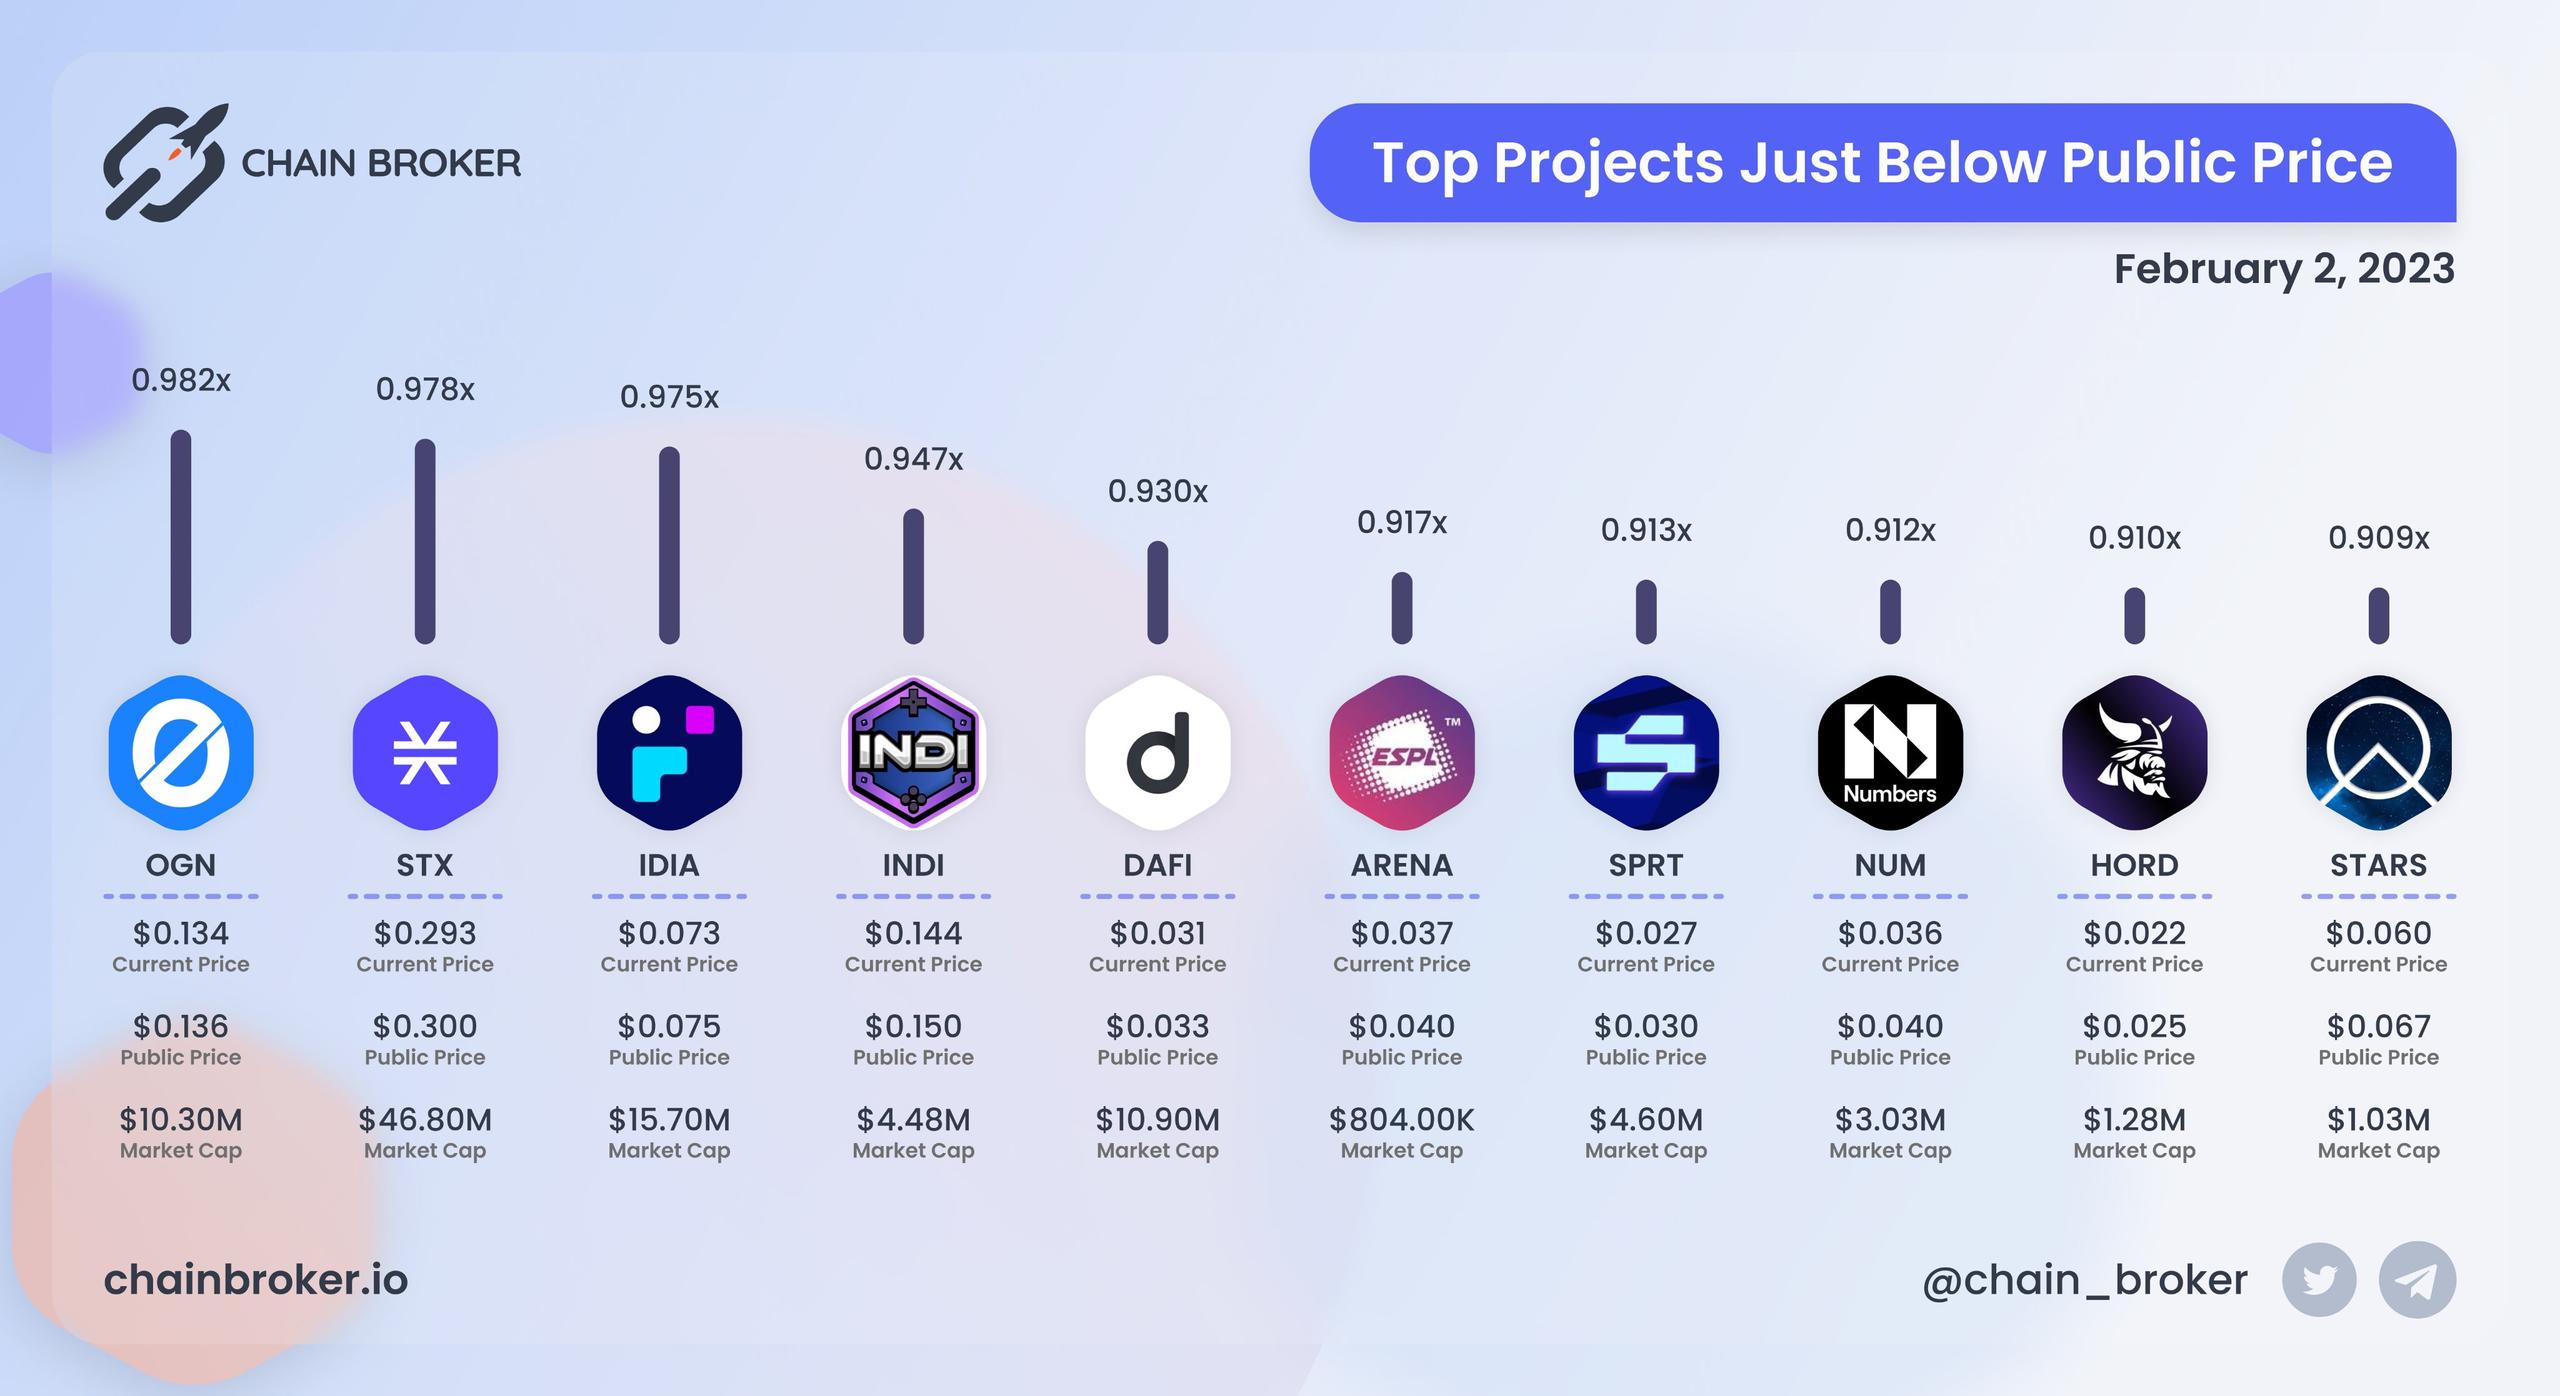 Top projects below public price